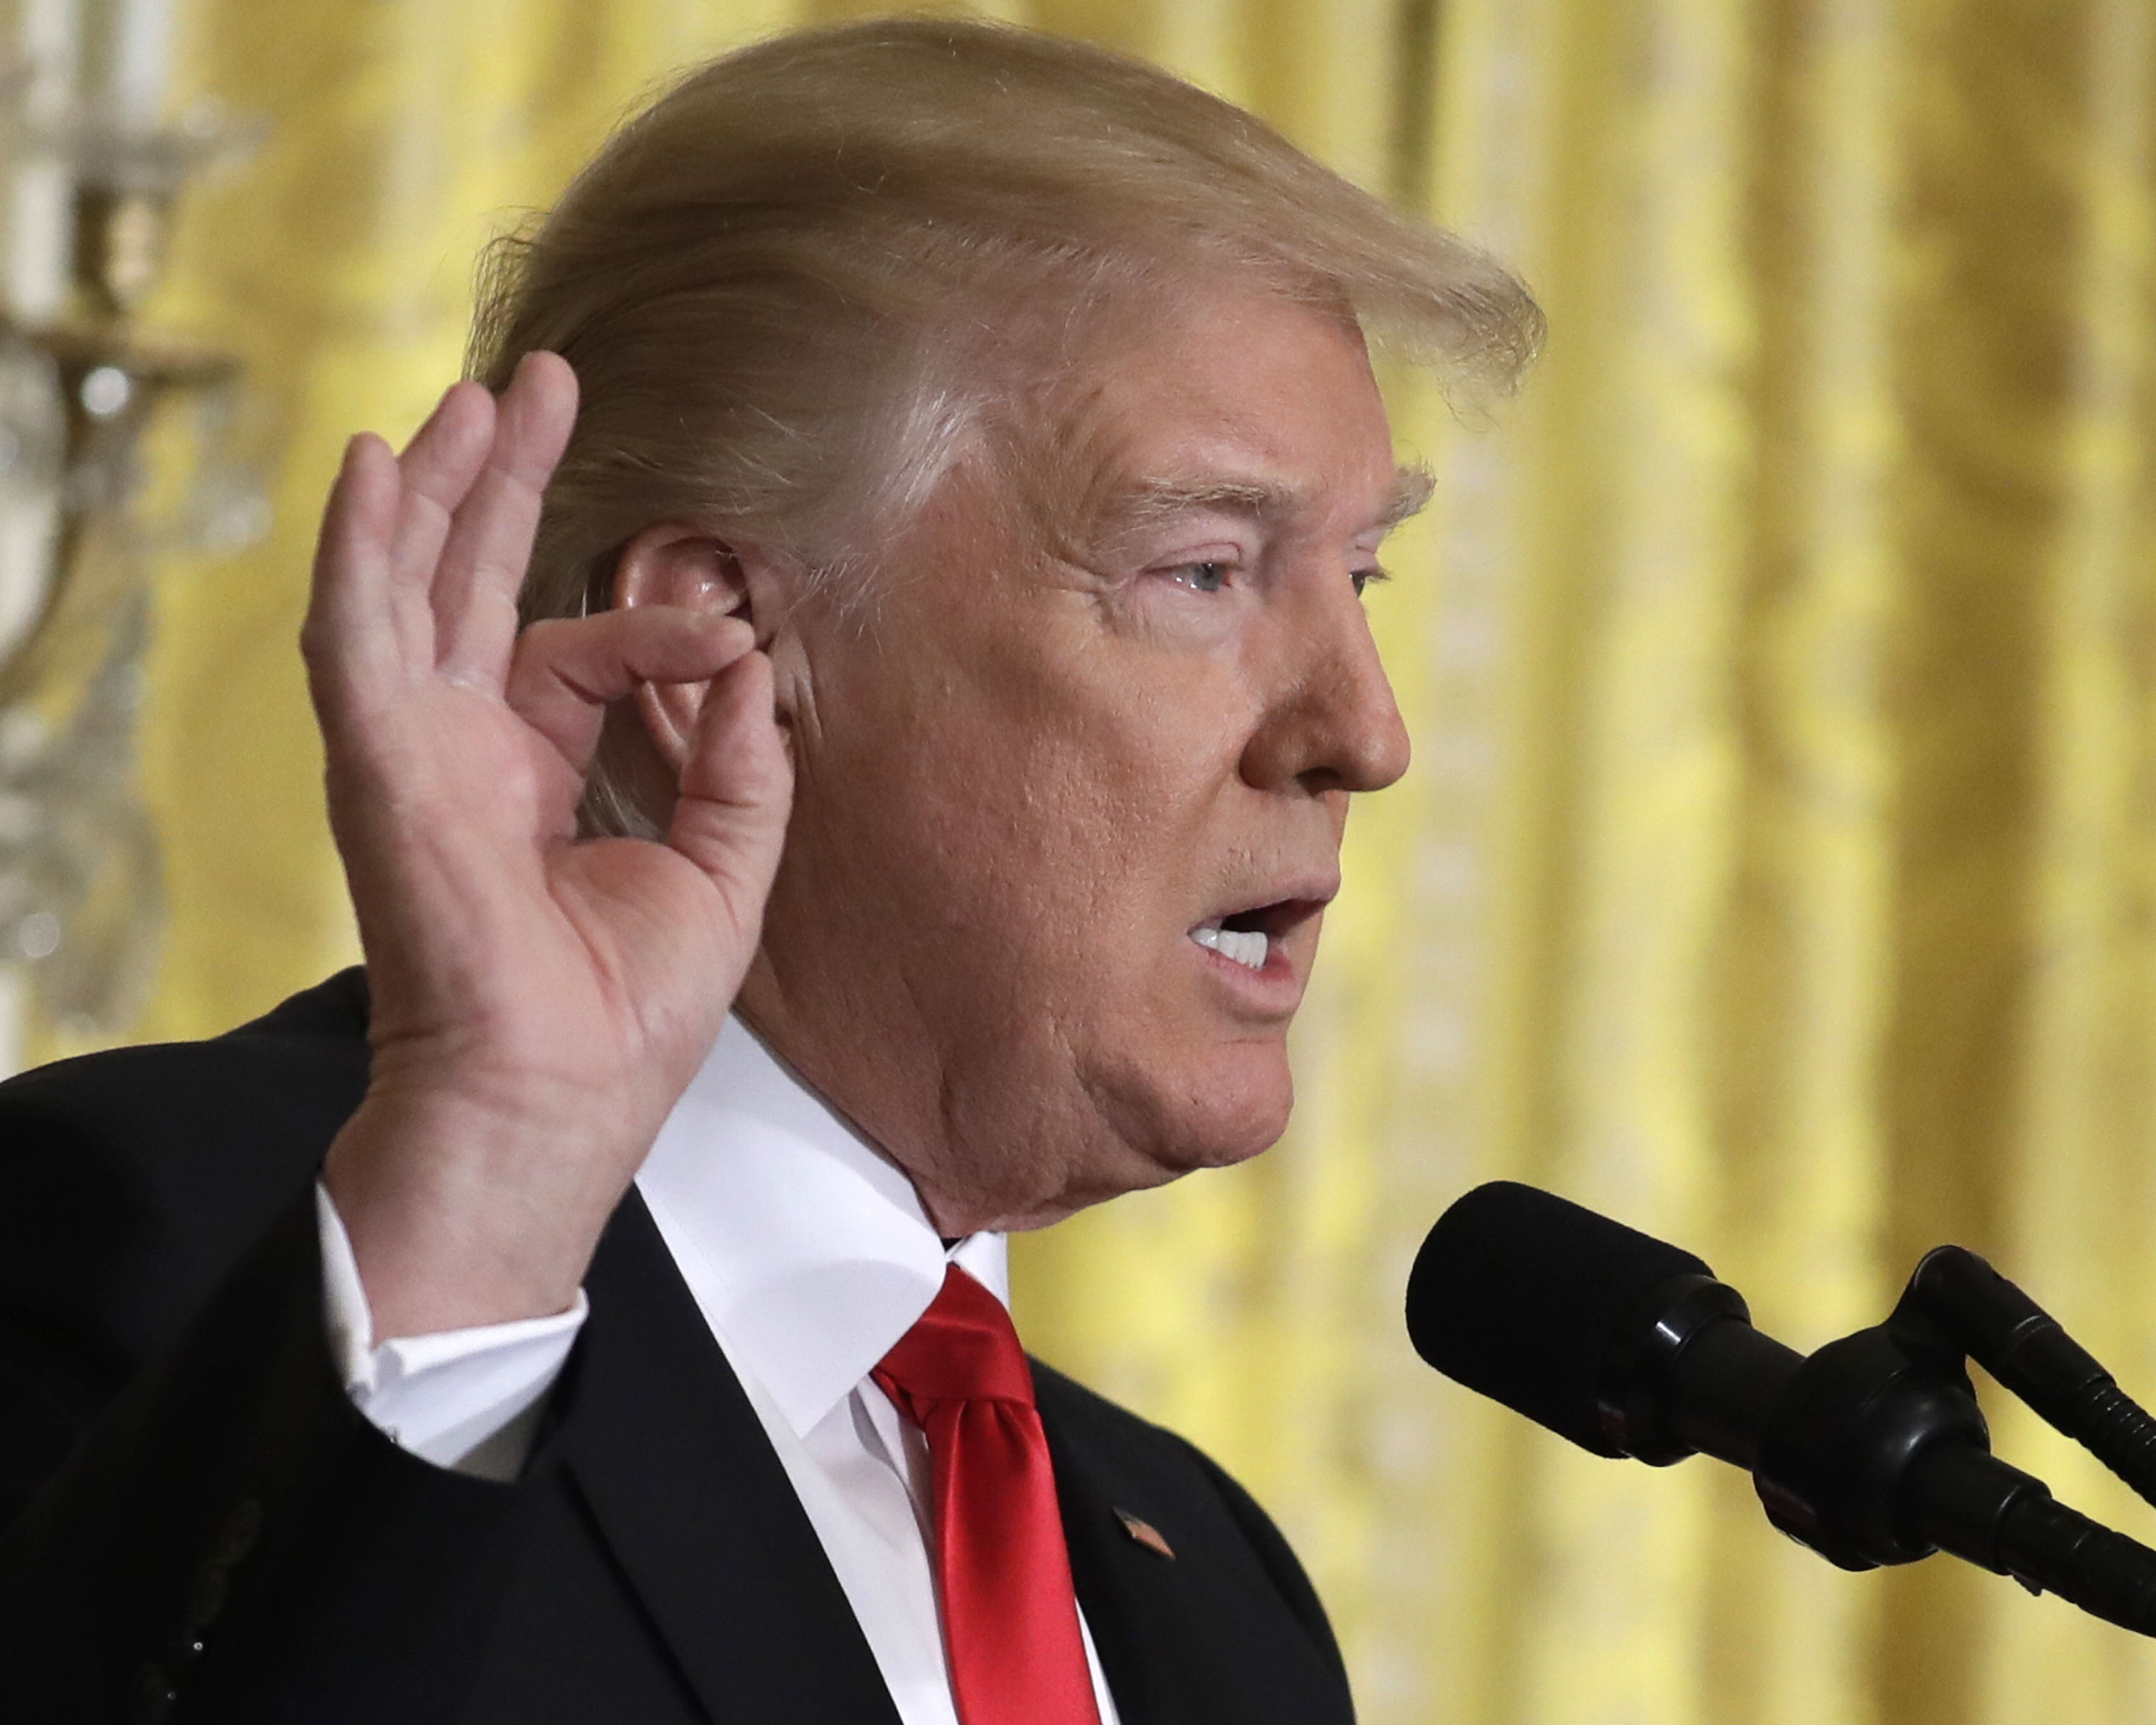 President Donald Trump speaks during a news conference, in the East Room of the White House in Washington, on February 16, 2017. Photo: AP